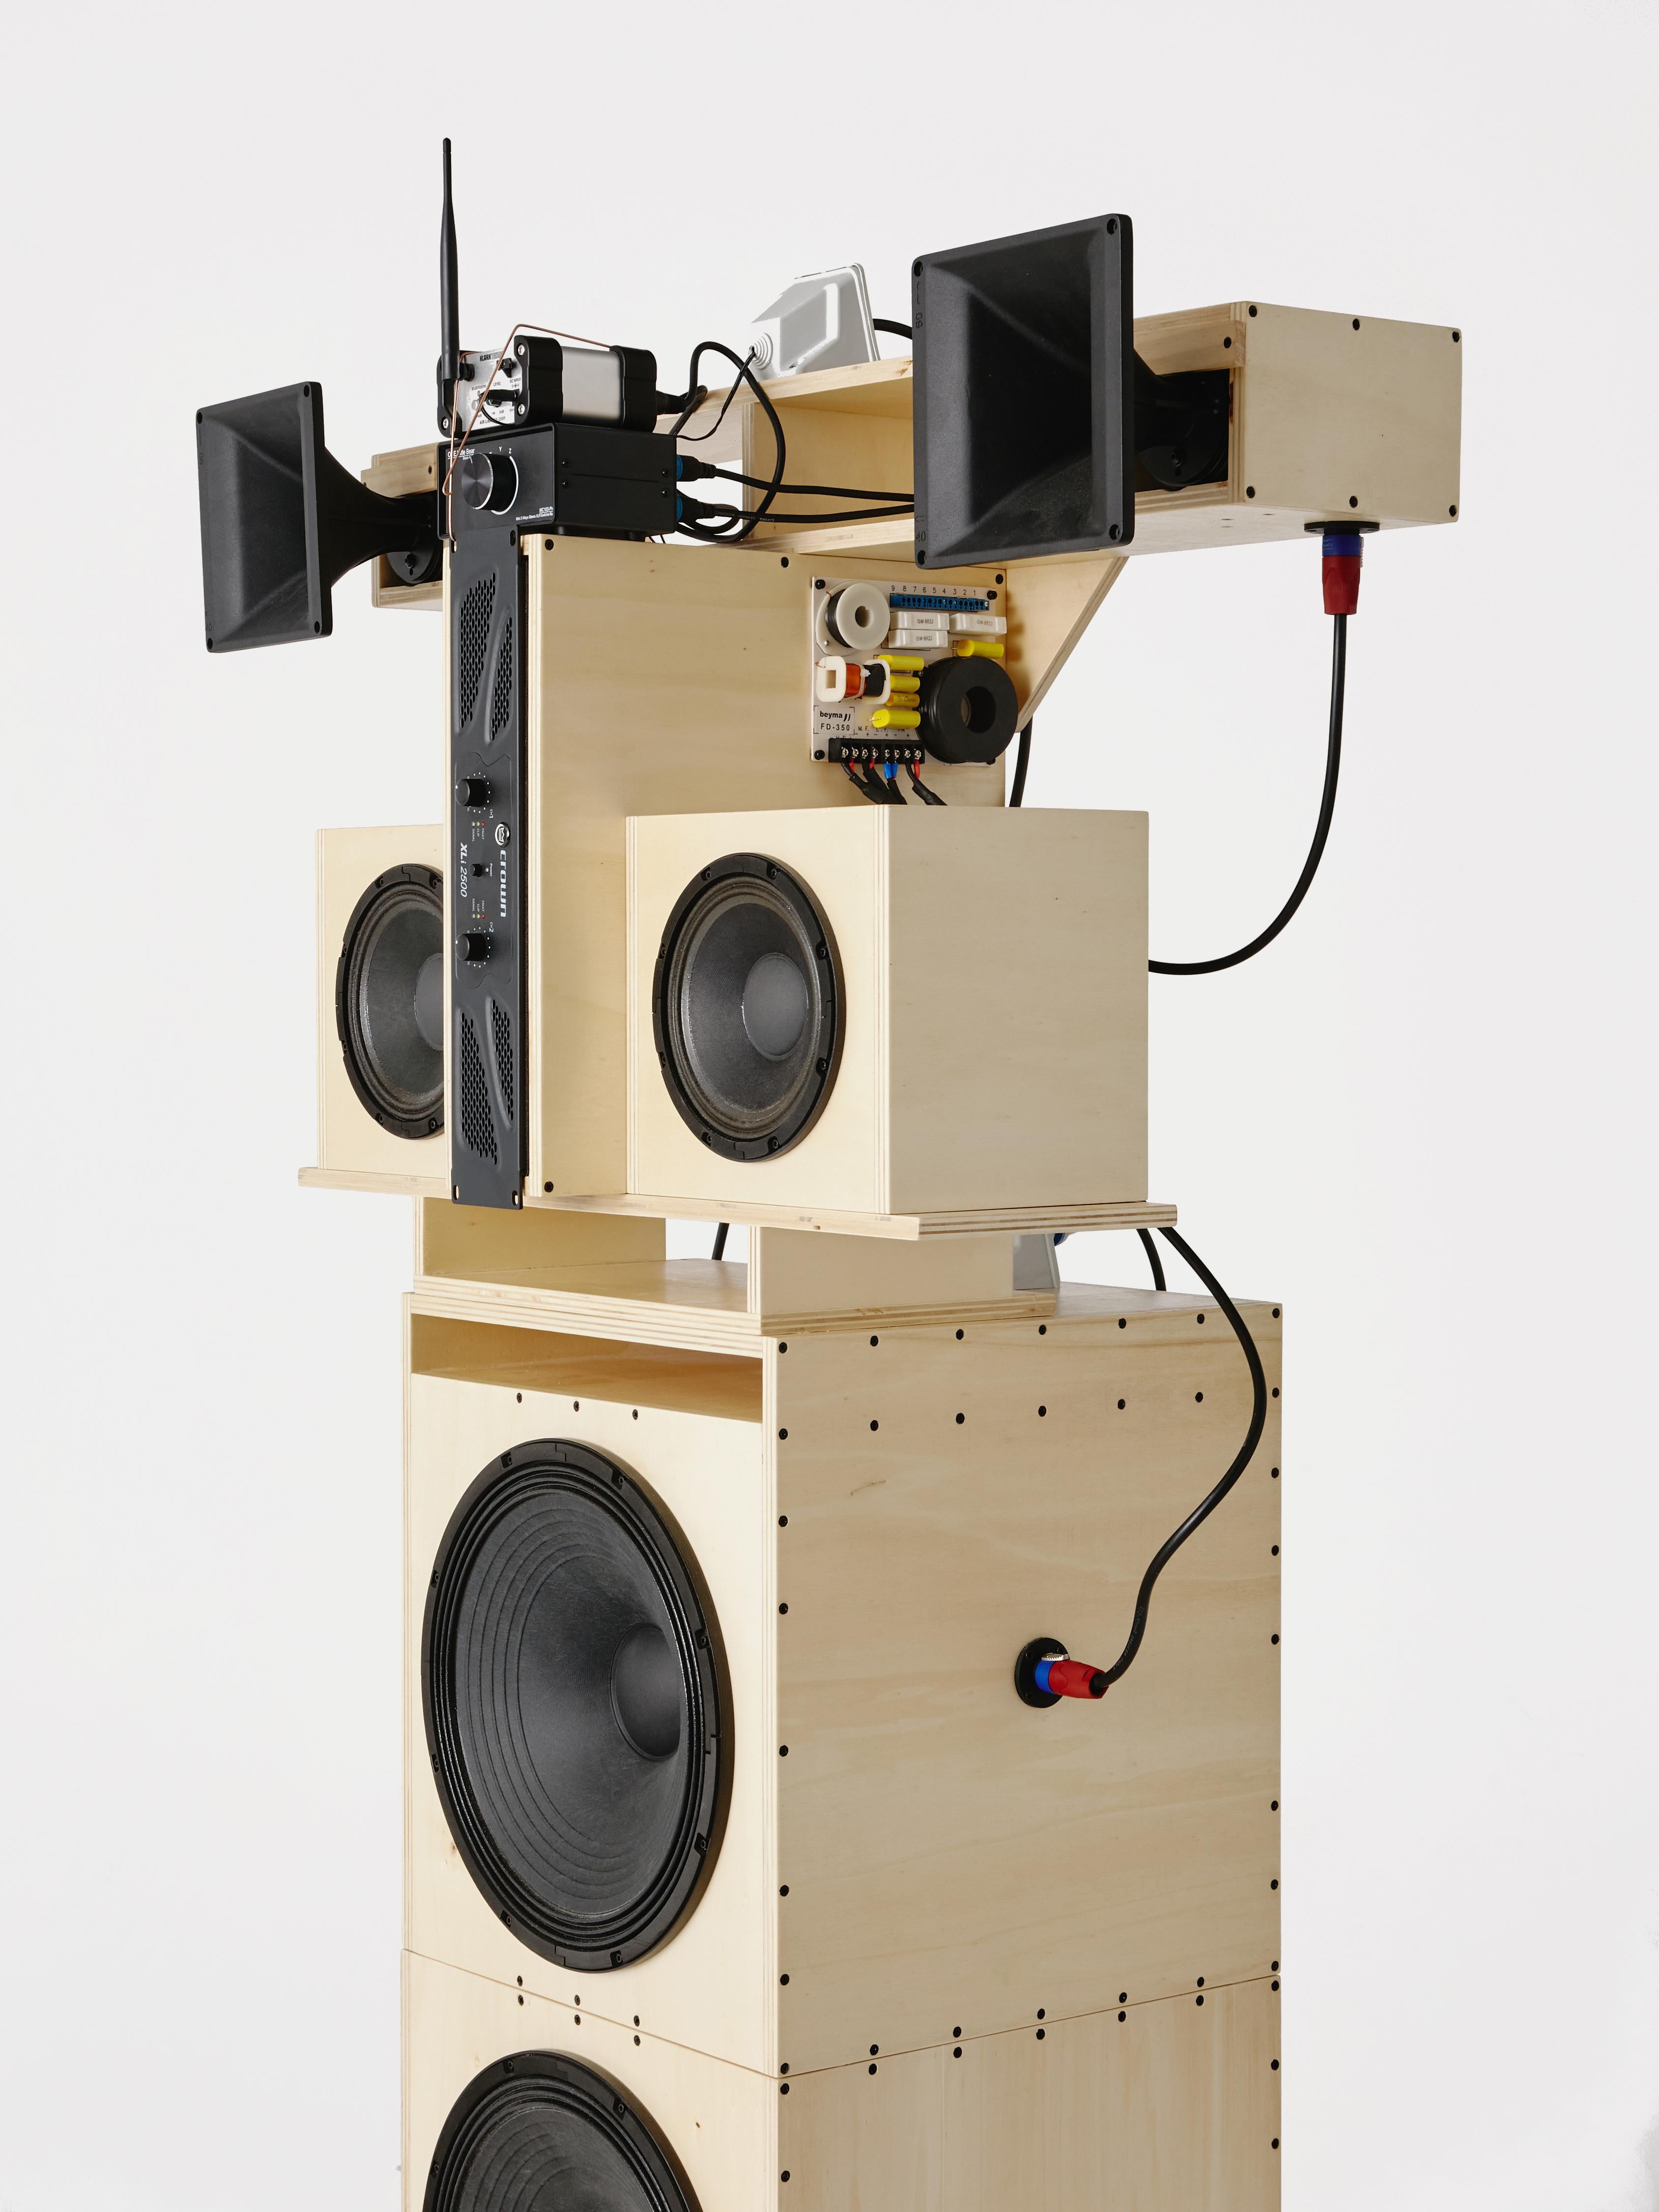 Sound System 3, also known as 'La Niña', is a piece that forms part of the collection SS. The sustainably grown reclaimed plywood (Europe) originates from the 2021 exhibition 'Materia Gris' in Centro Centro Cibeles, Madrid. After this exhibition, it